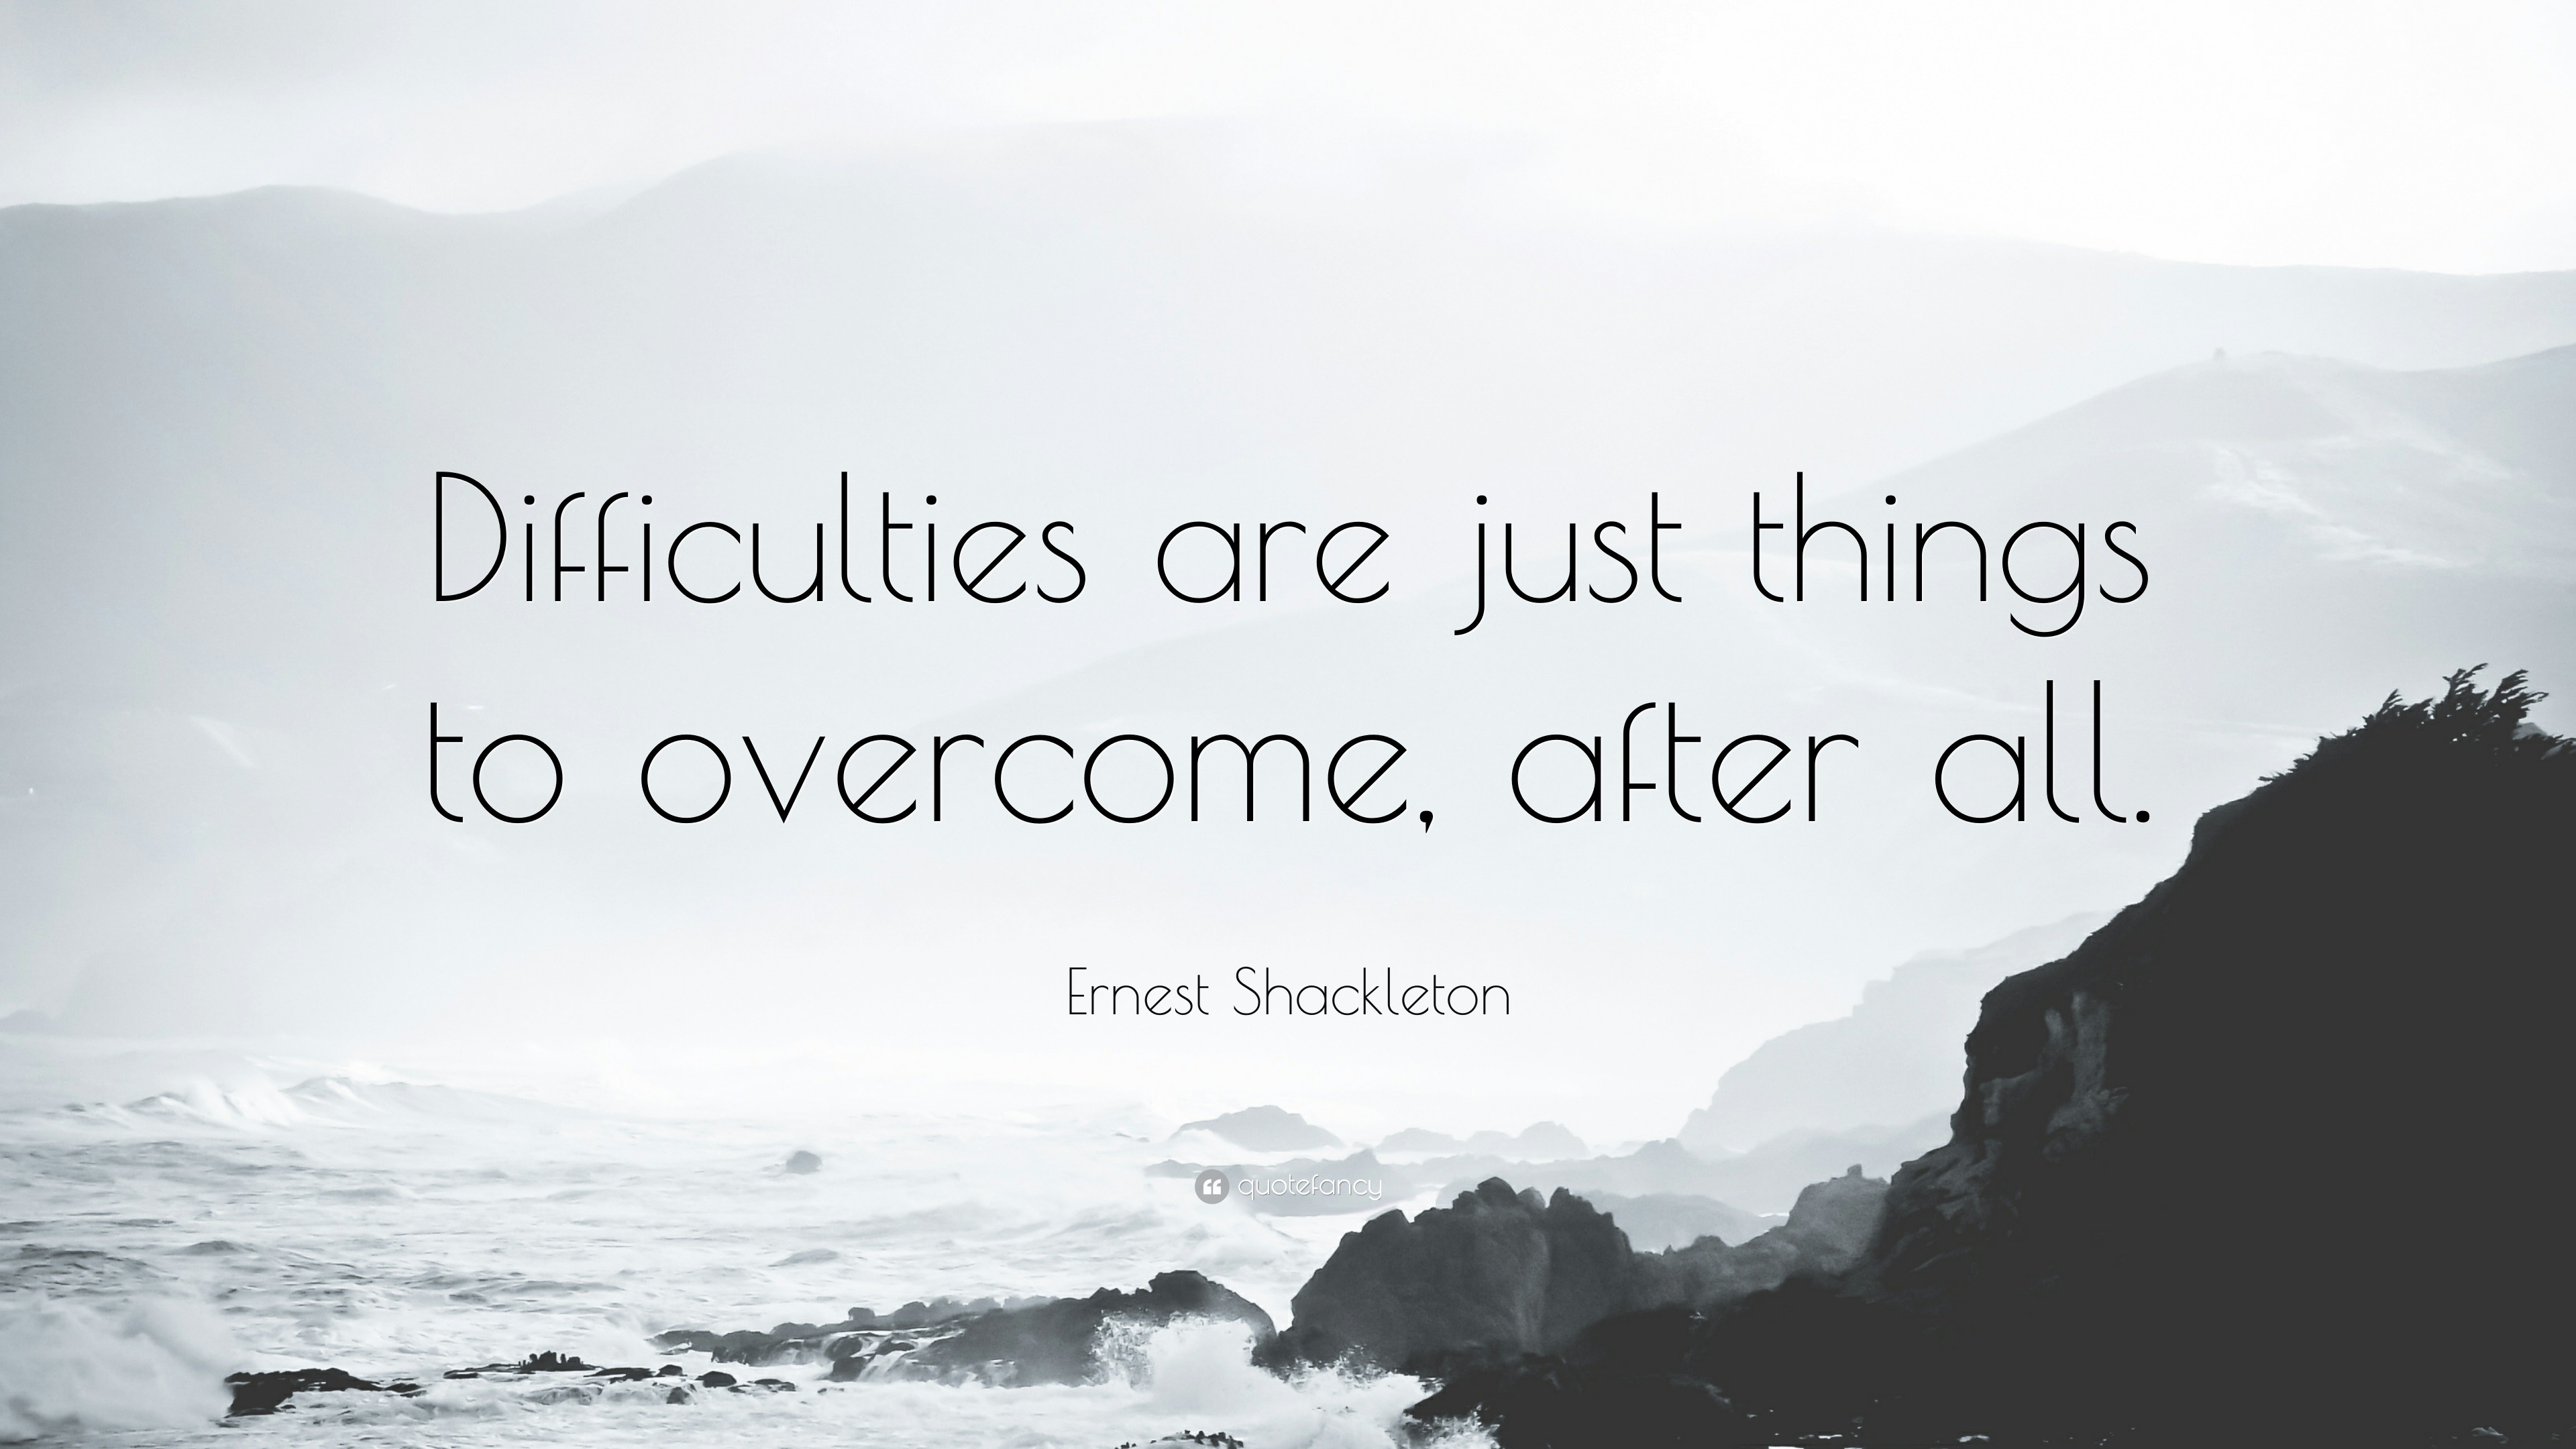 Ernest Shackleton Quotes (21 wallpapers) - Quotefancy